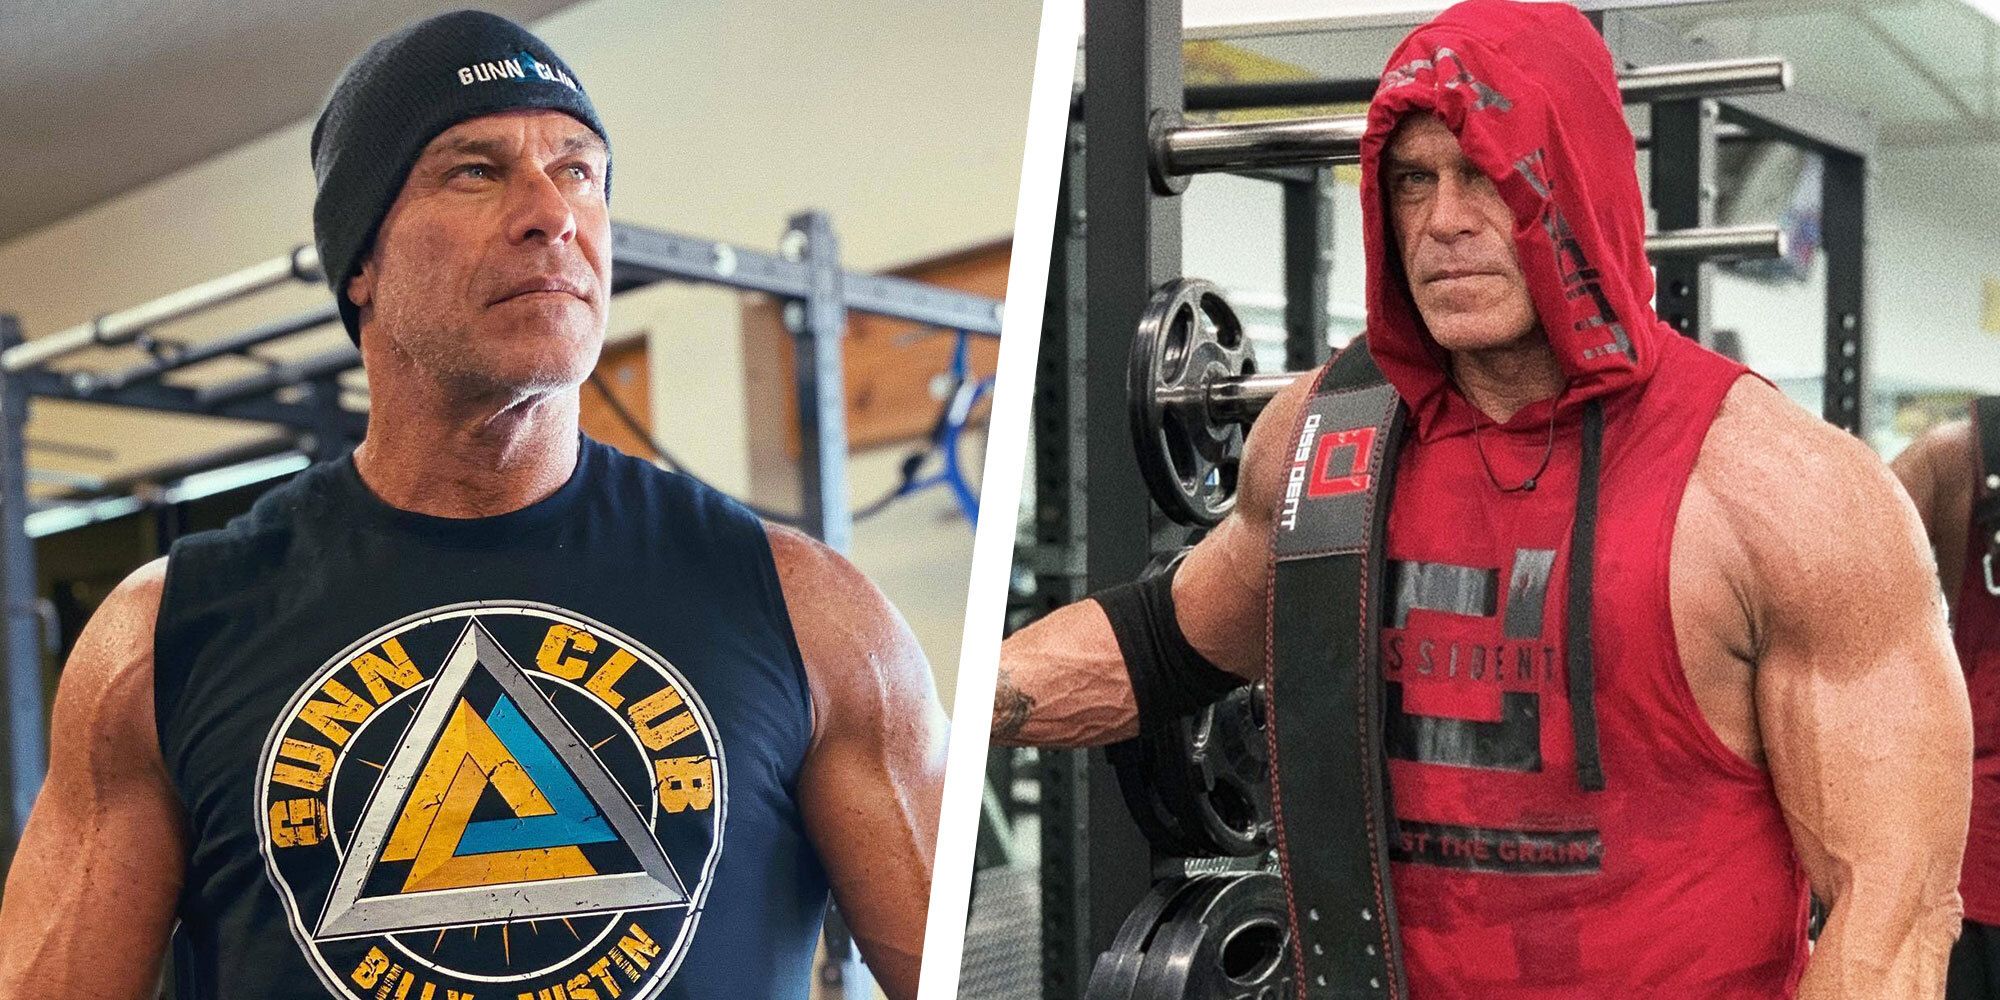 Wrestler Billy Gunn Shared His Training Workout and Diet at 58